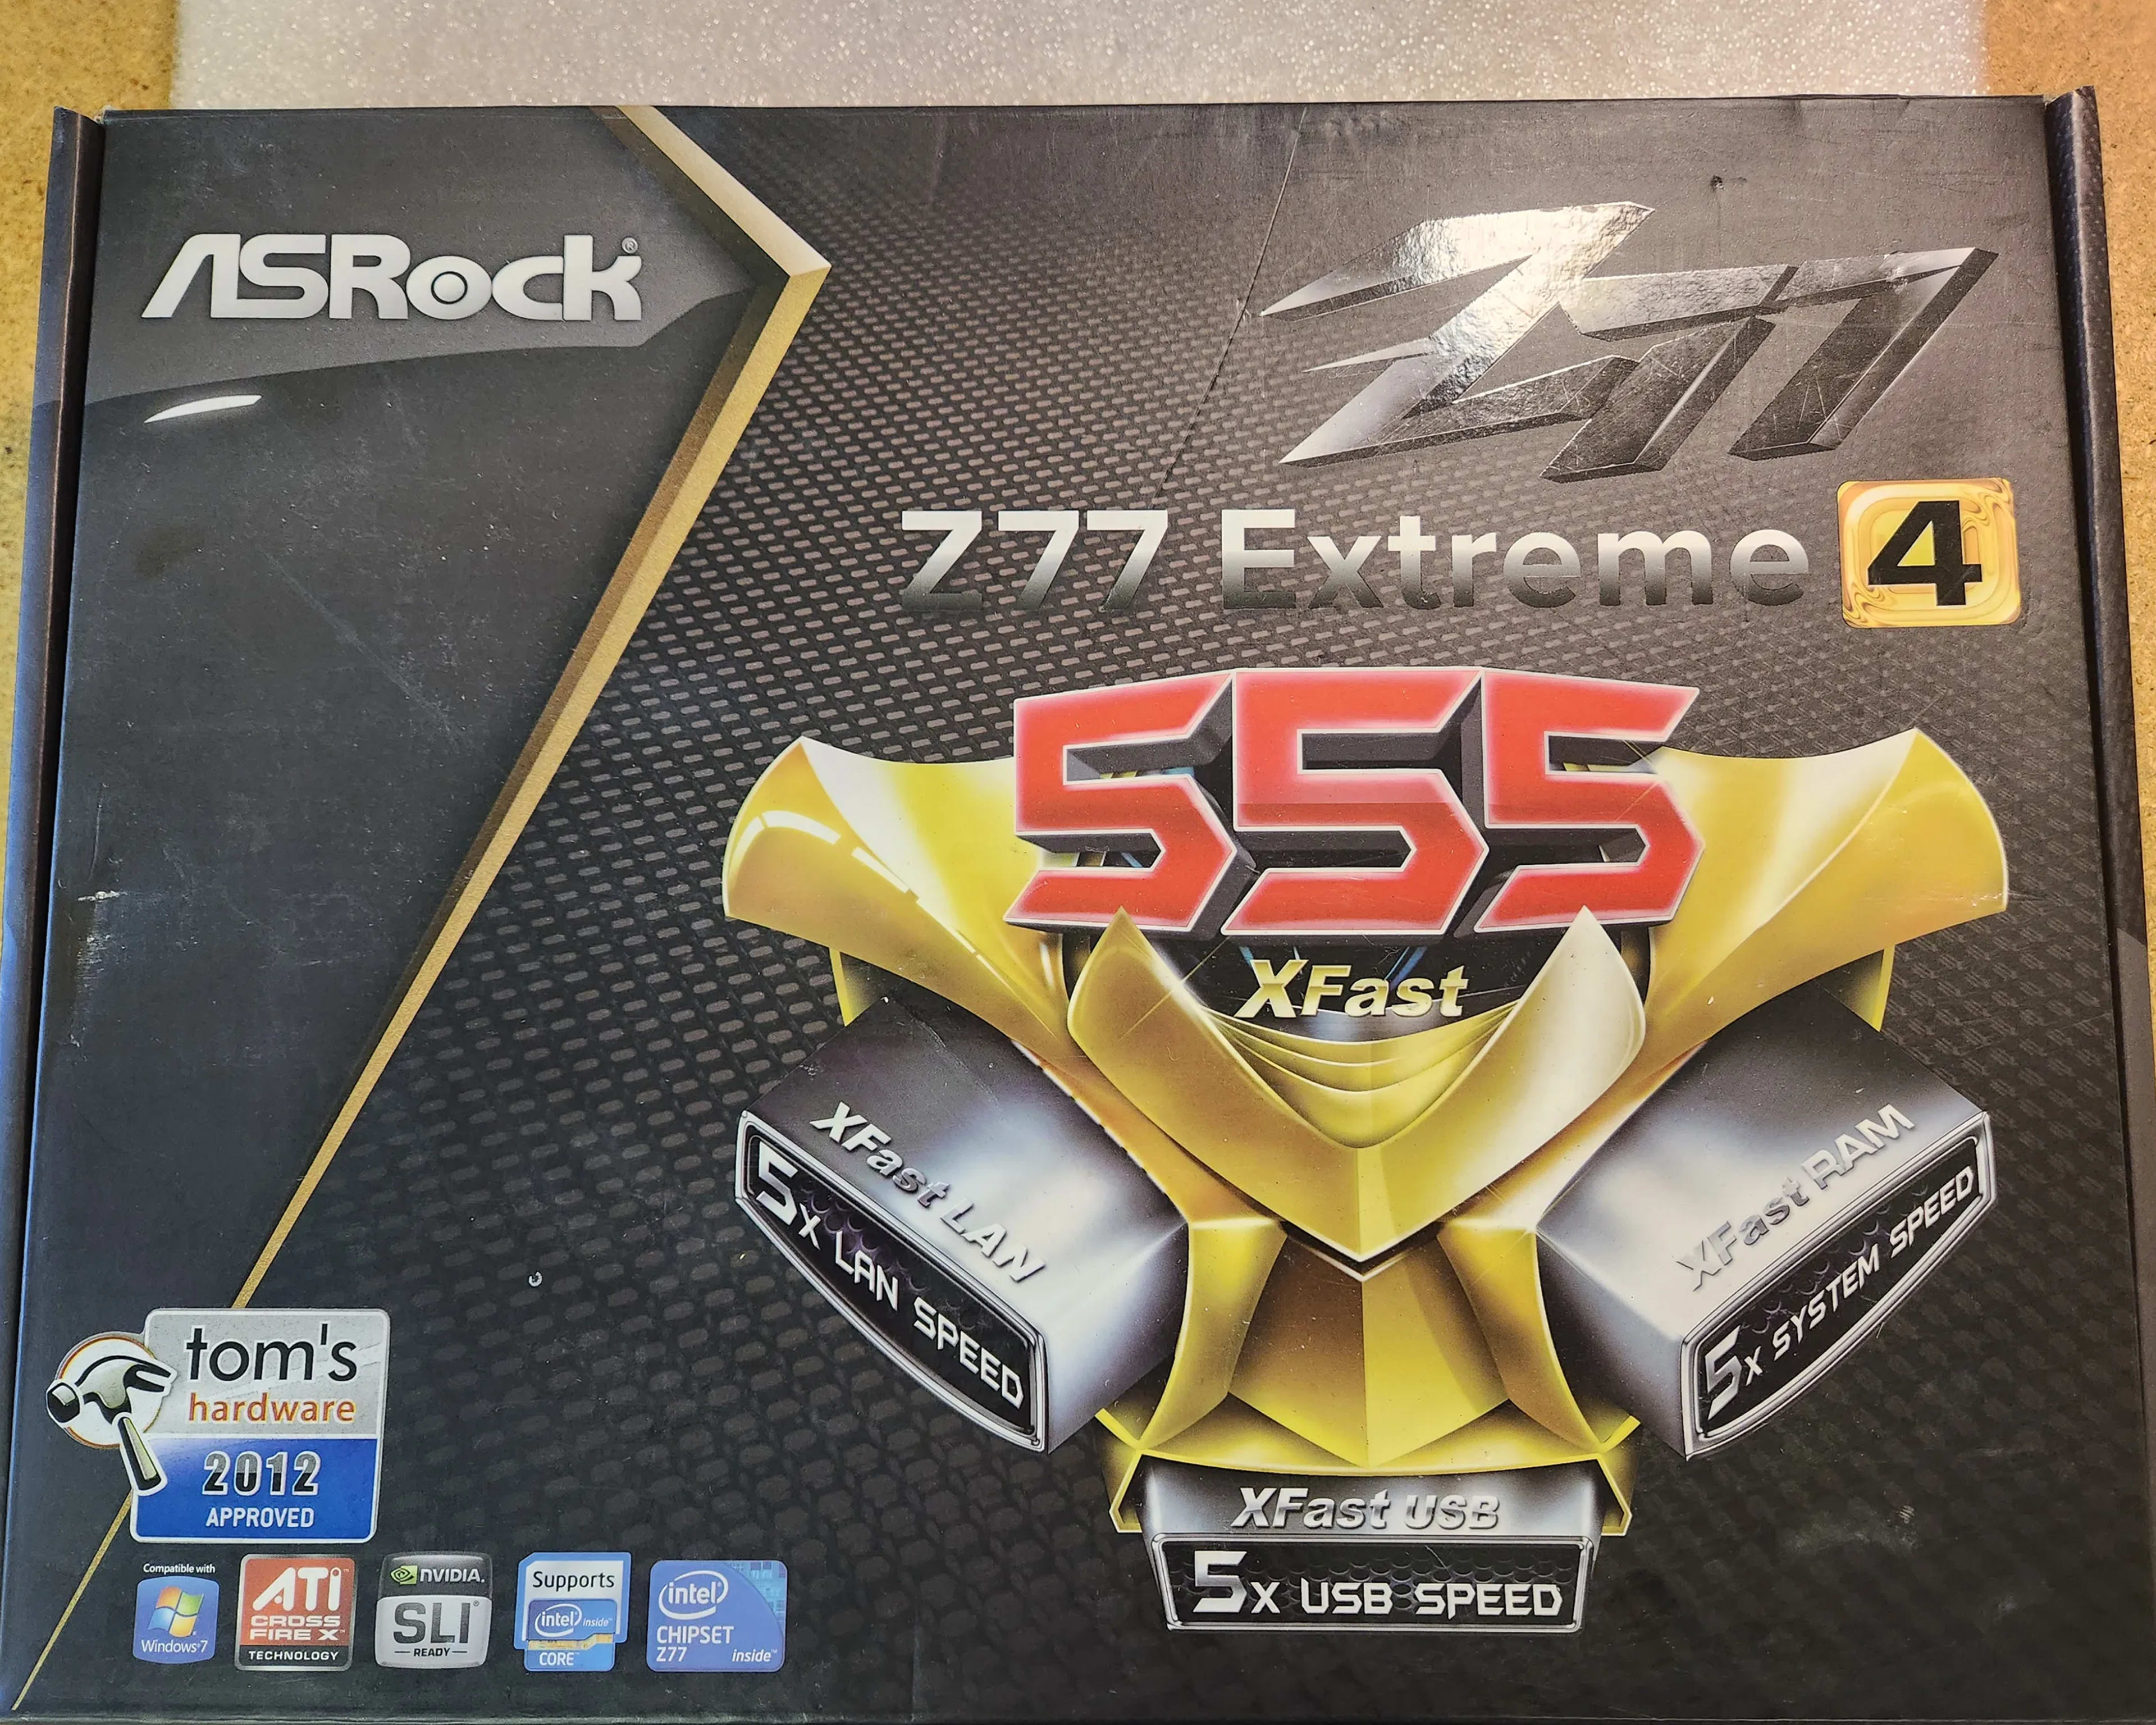 ASRock Z77 Extreme 4 motherboard combo with I7-2600 / G-SKILL 16GB DDR3, LGA 1155